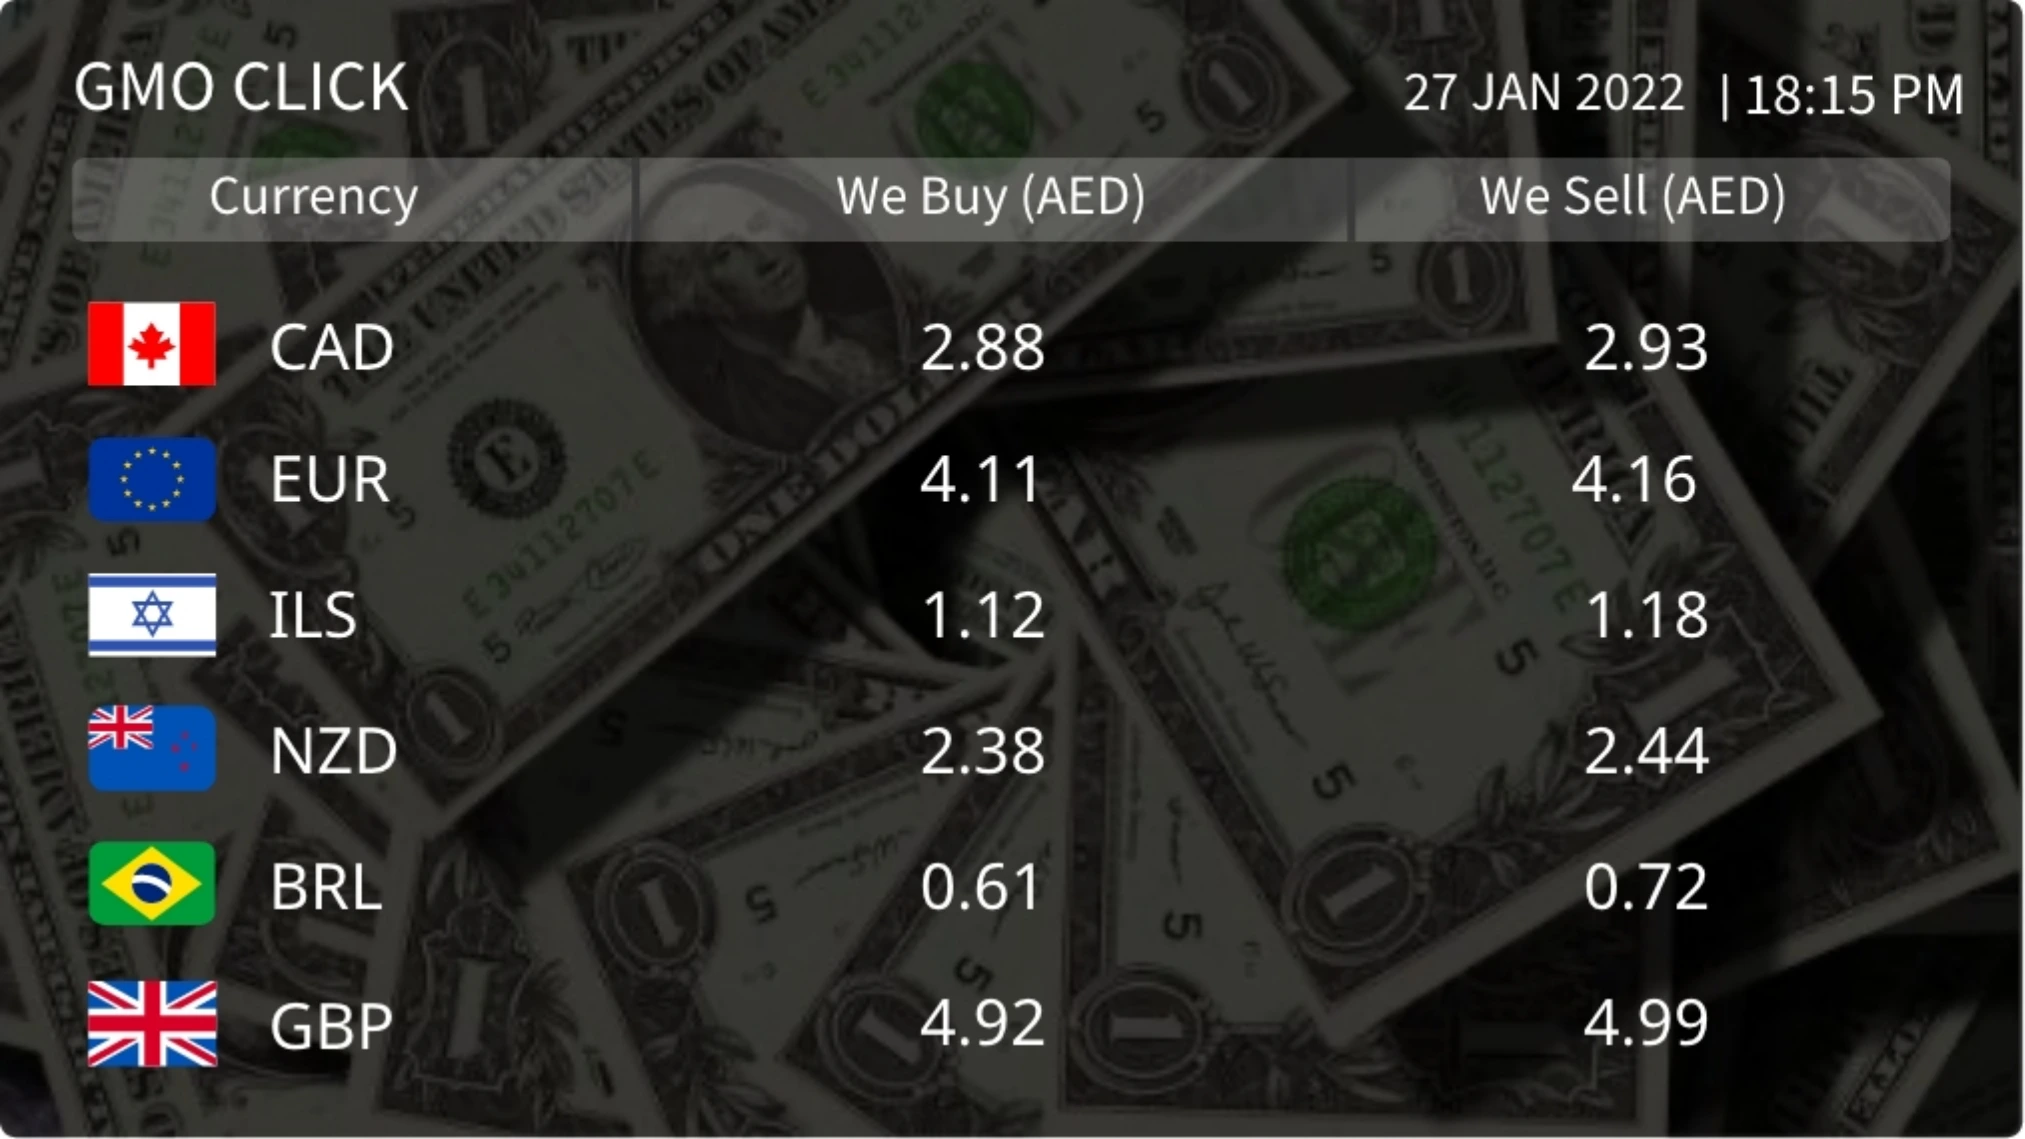 Currency app layout preview showing dollar bills image as background, GMO Click brand text and five currency rates.